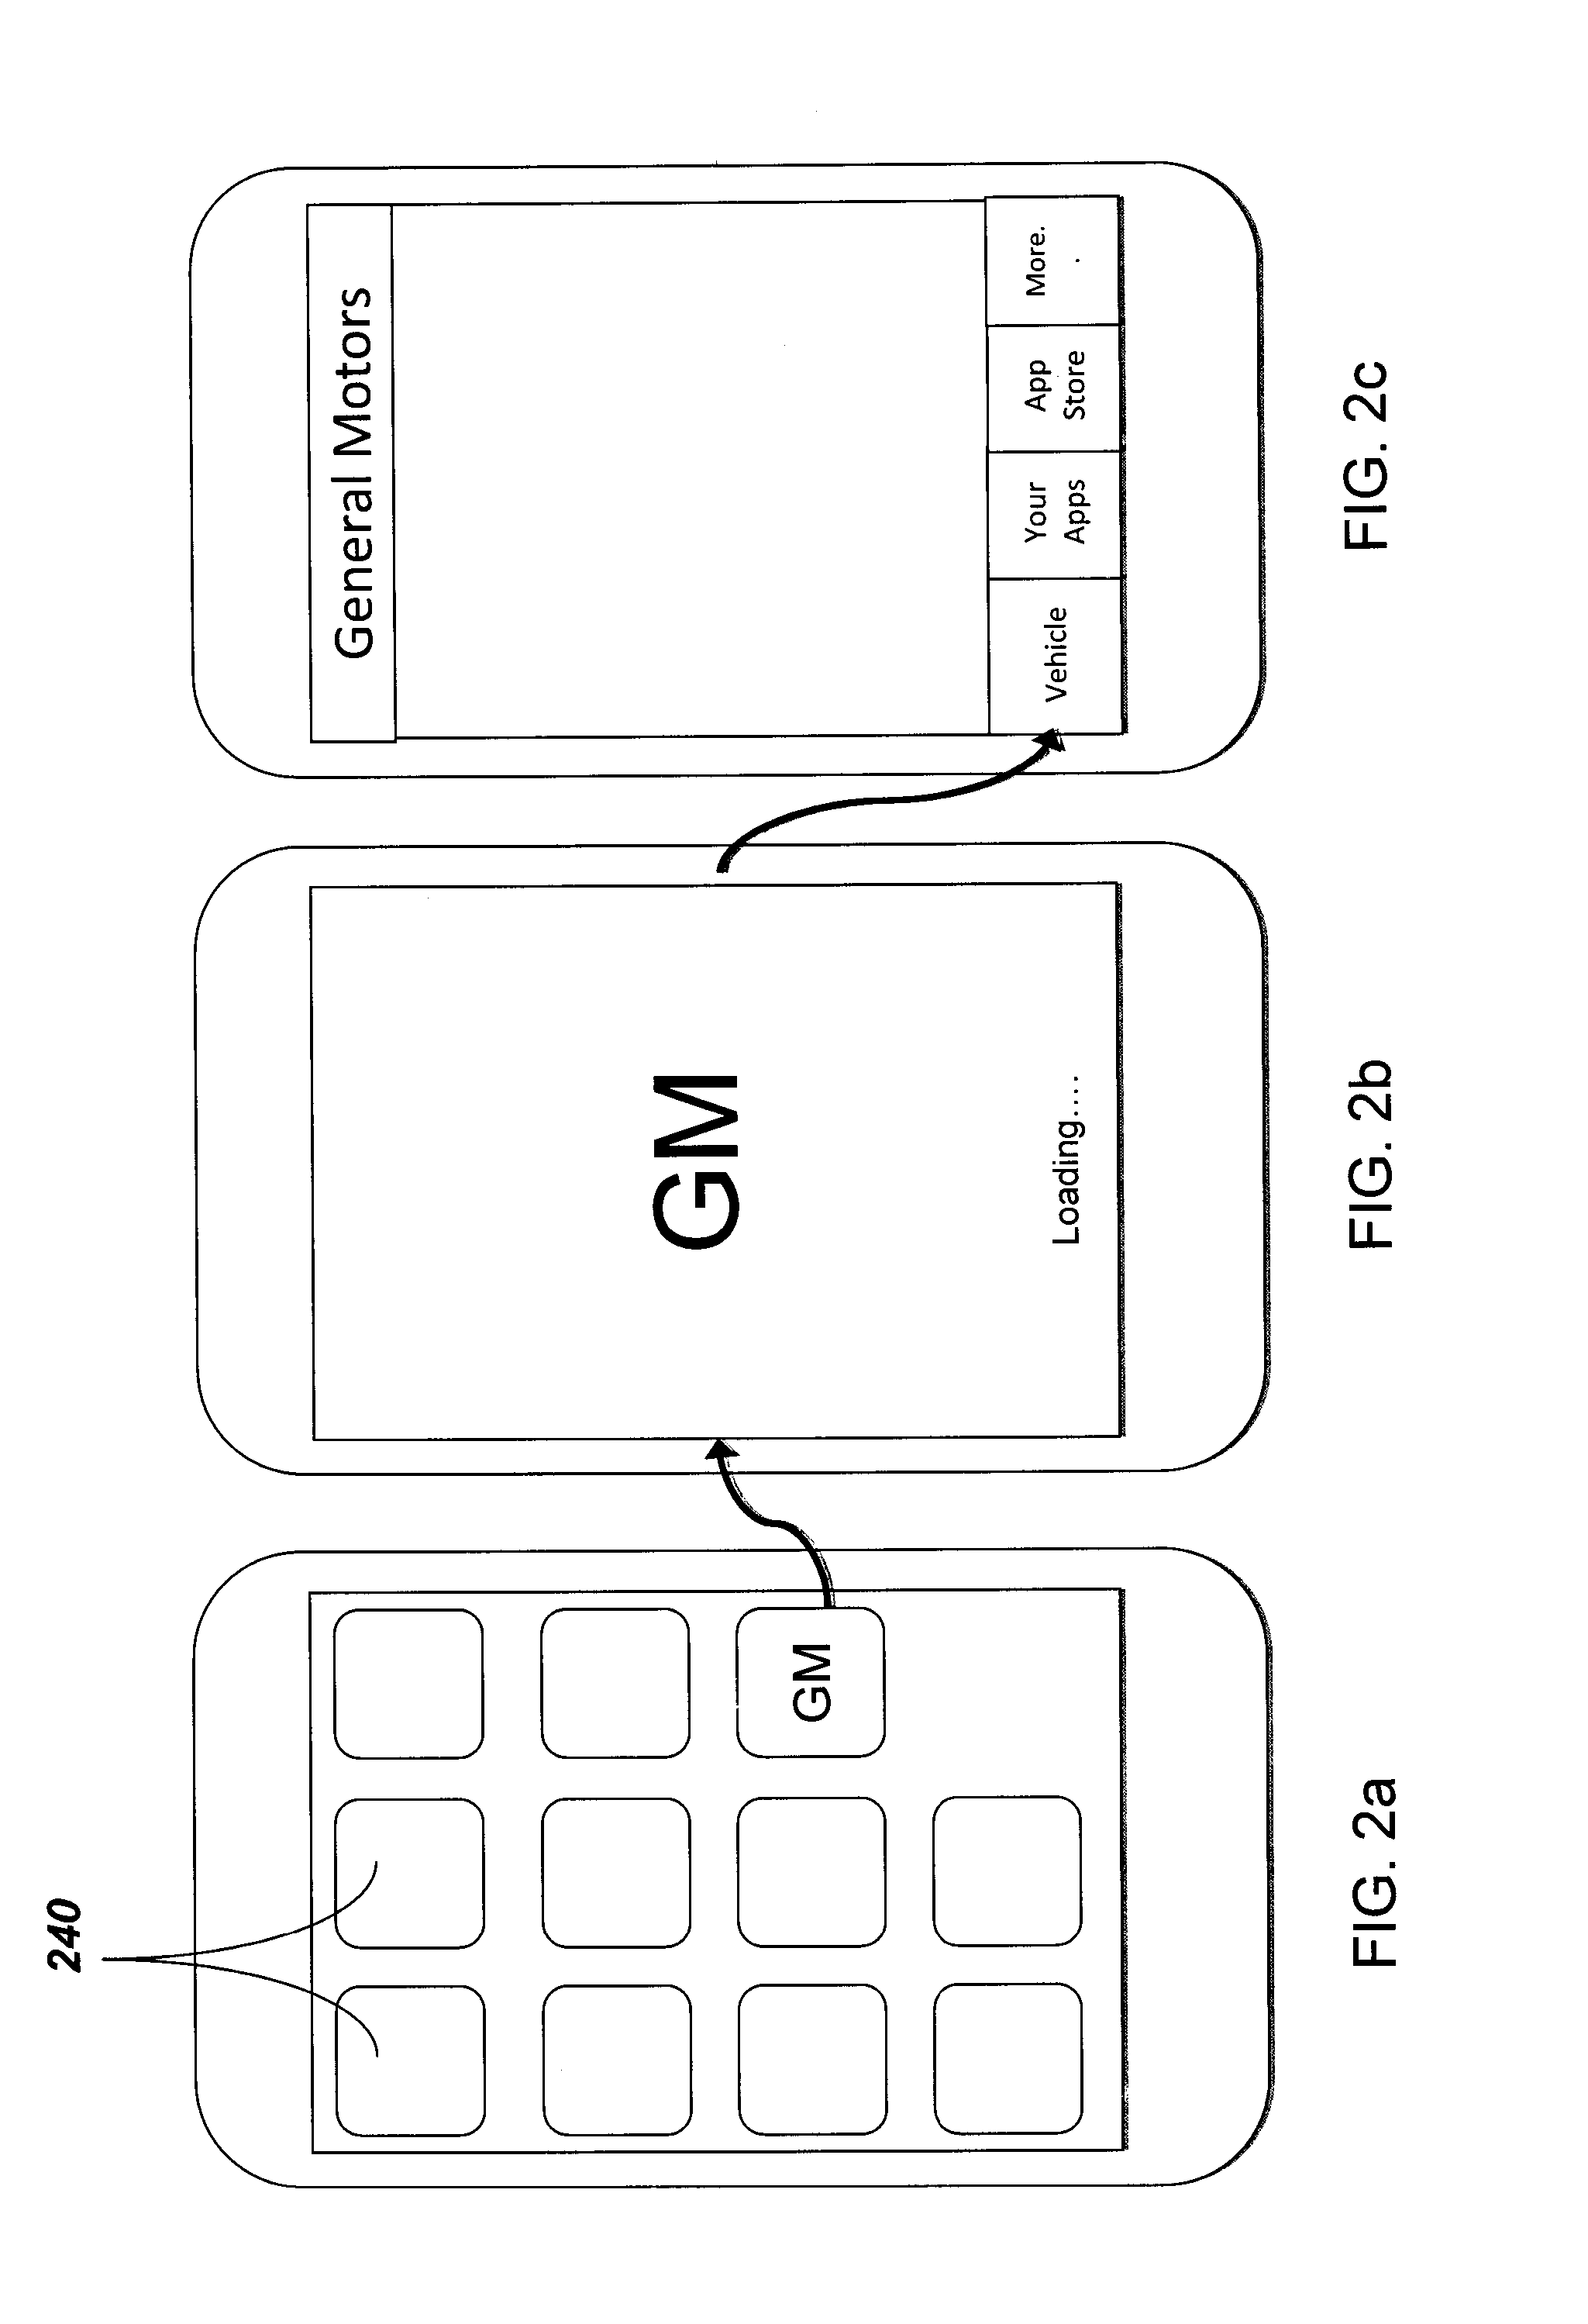 Method for using radio presets as application shortcuts